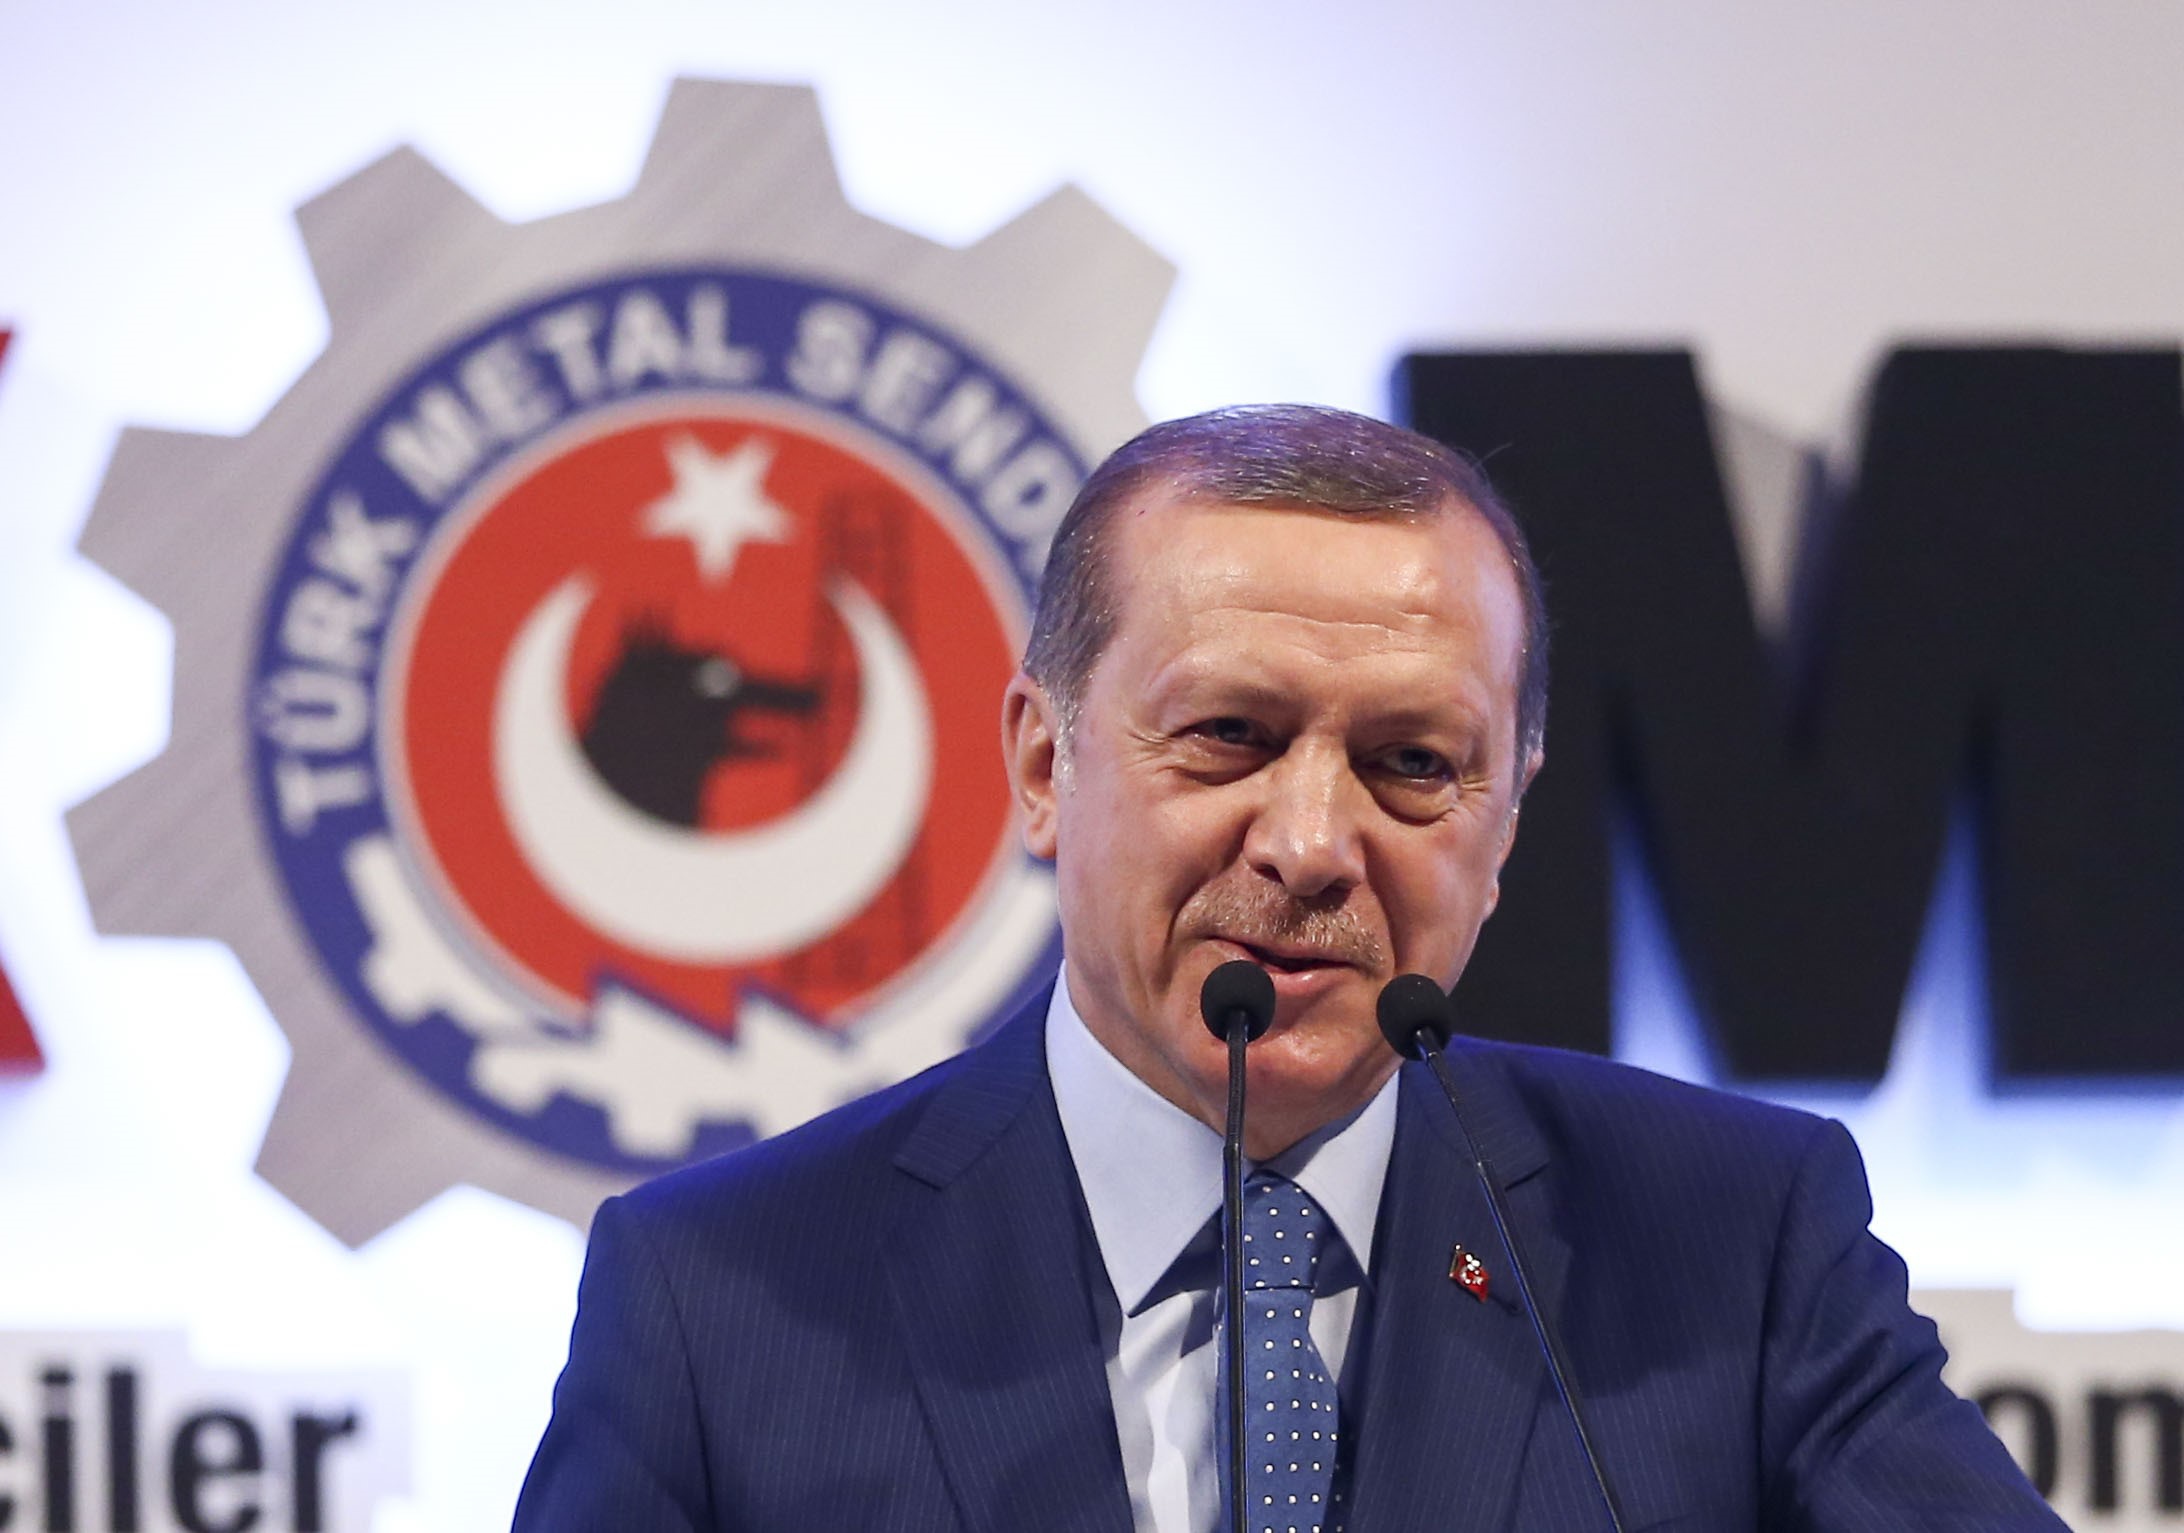 Turkish President Recep Tayyip Erdogan delivers a speech marking the International Women's Day during the 21st Women Workers' Grand Convention of metal unions in capital Ankara, Turkey on March 08, 2016. (Ahmet Izgi—Anadolu Agency/Getty Images)